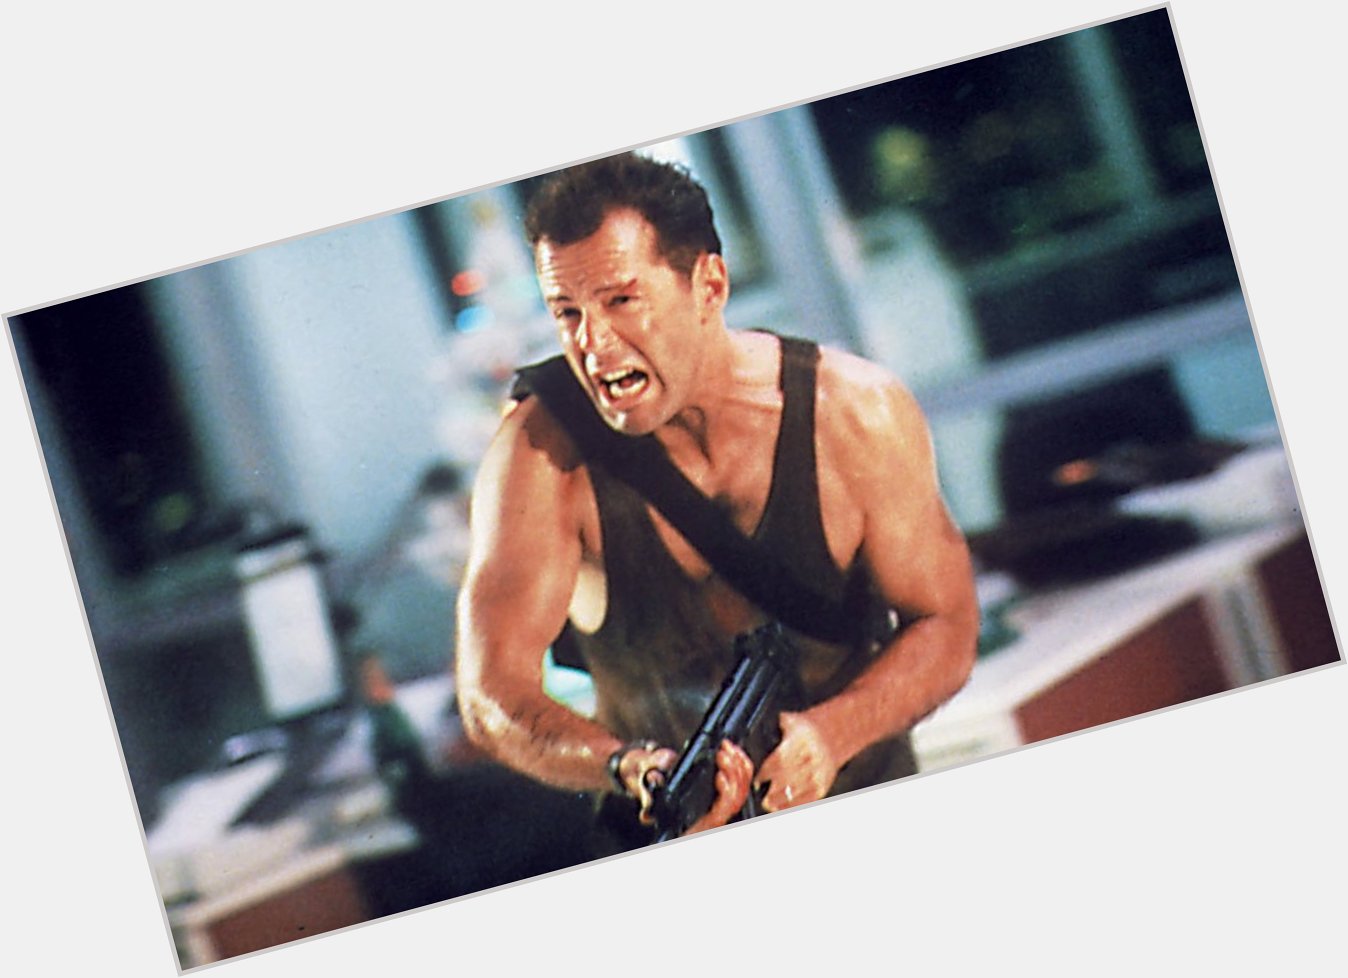 Happy Birthday to one of greatest action movie-stars of all-time, Bruce Willis!!! 1/2 